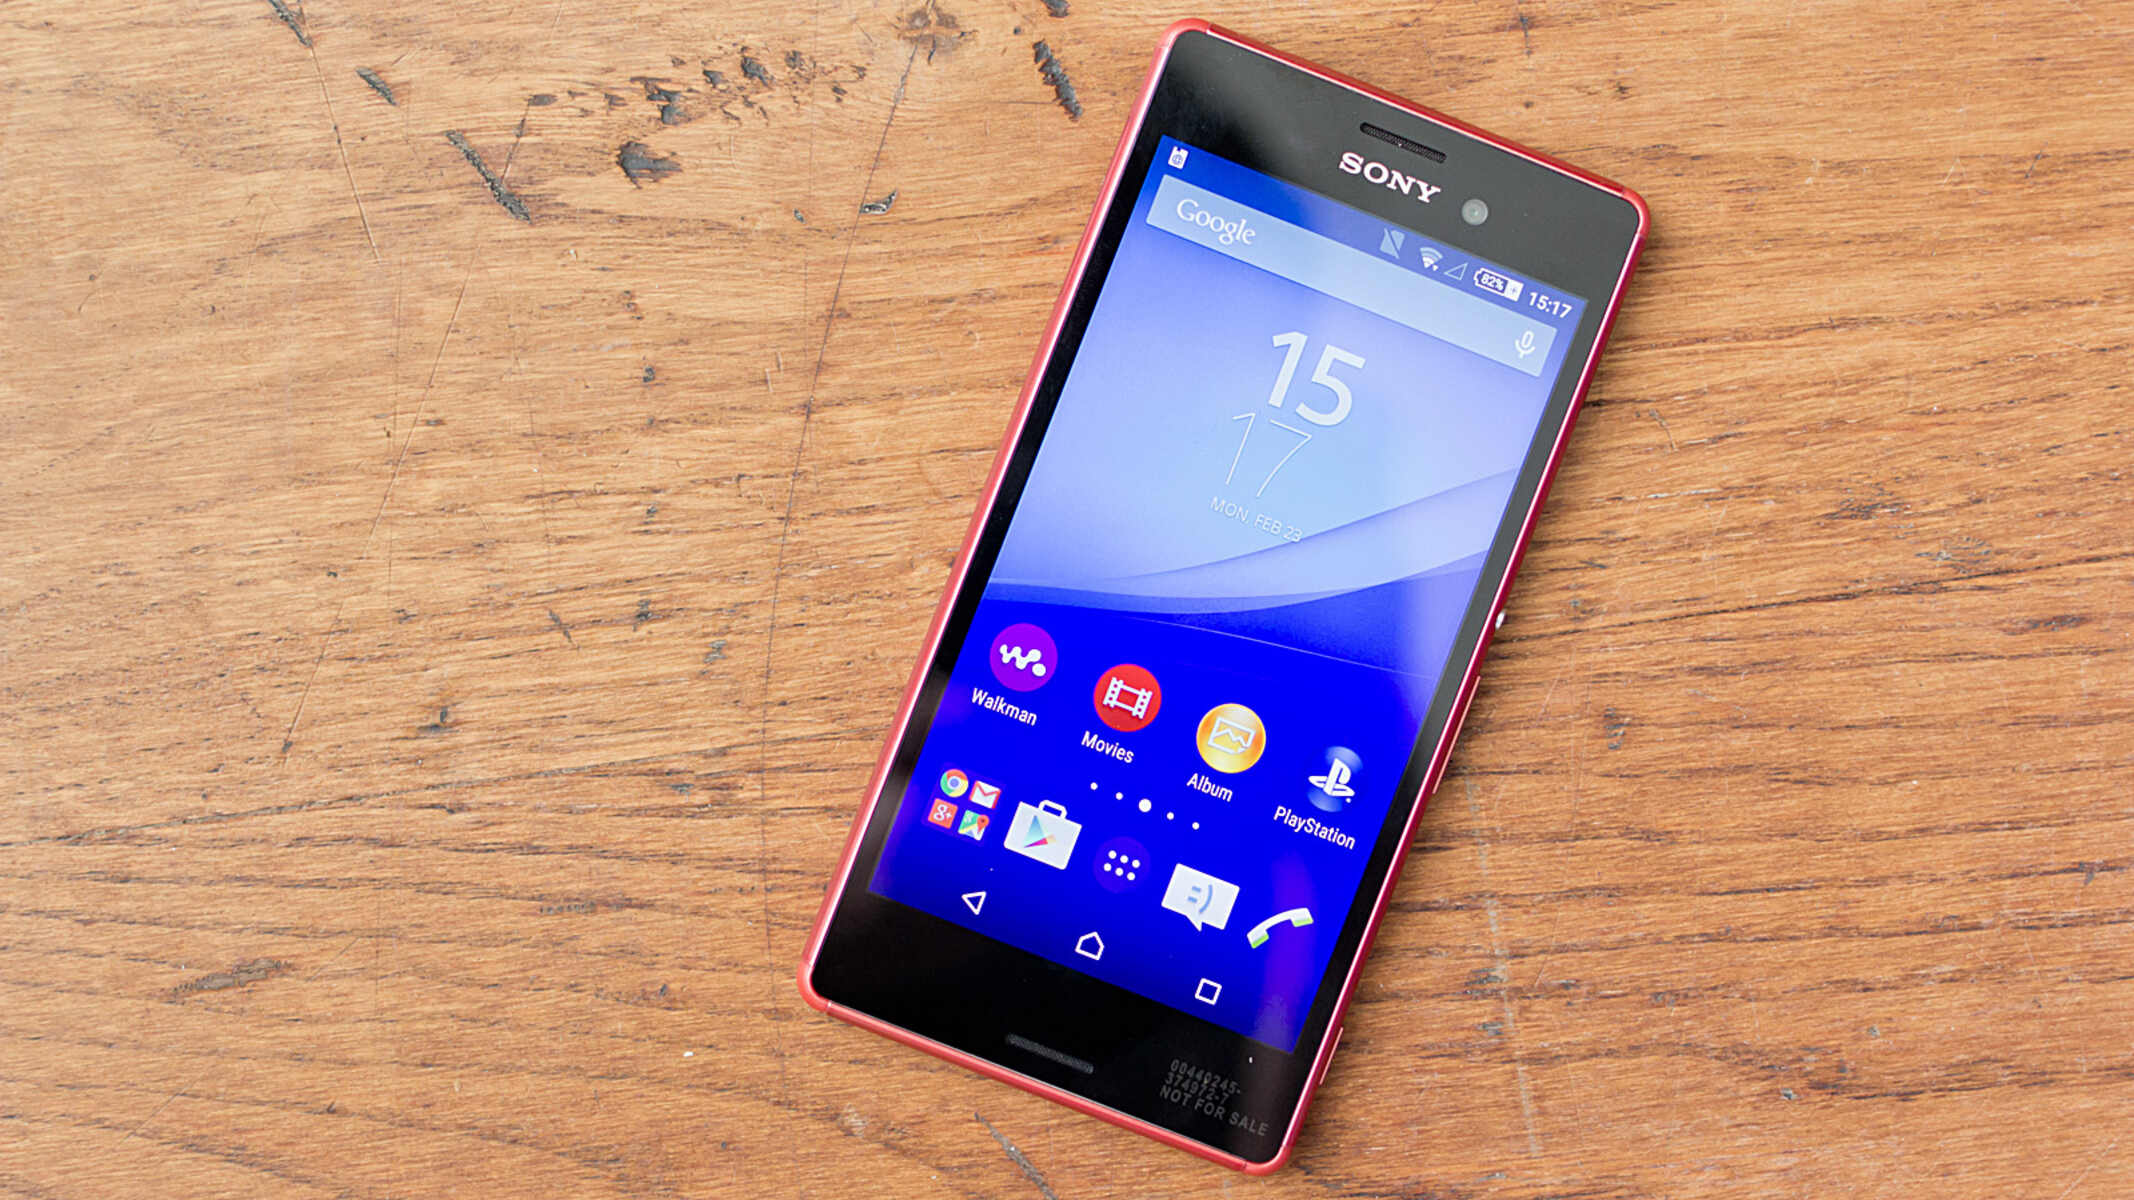 Recording Phone Calls On Sony Xperia M: A Step-by-Step Tutorial